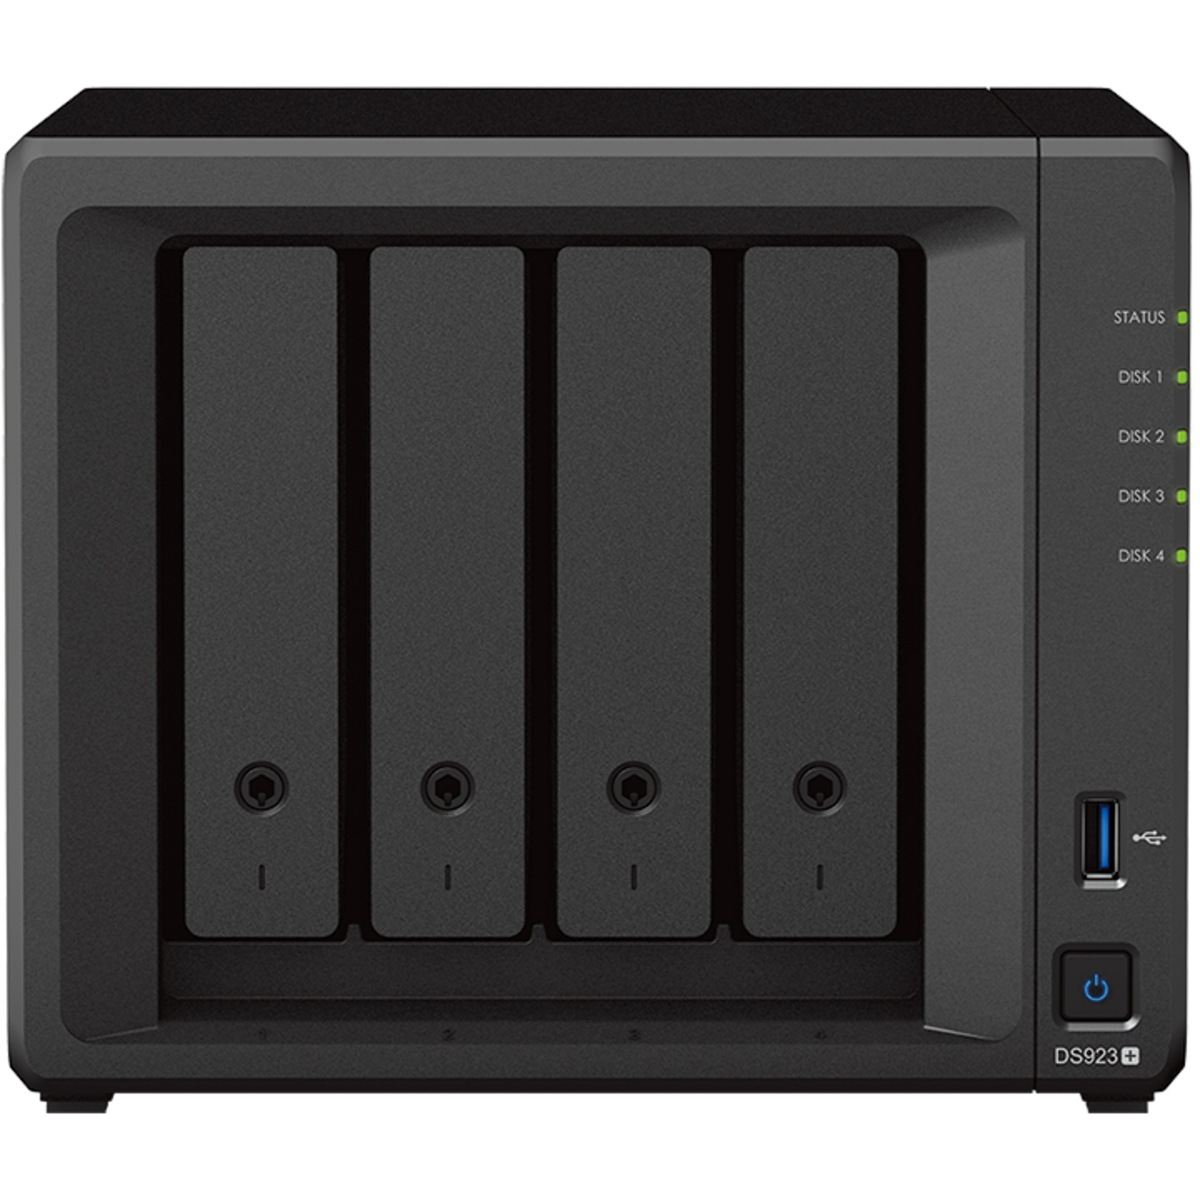 Synology DiskStation DS923+ 32tb 4-Bay Desktop Multimedia / Power User / Business NAS - Network Attached Storage Device 4x8tb Seagate IronWolf Pro ST8000NT001 3.5 7200rpm SATA 6Gb/s HDD NAS Class Drives Installed - Burn-In Tested - ON SALE - FREE RAM UPGRADE DiskStation DS923+